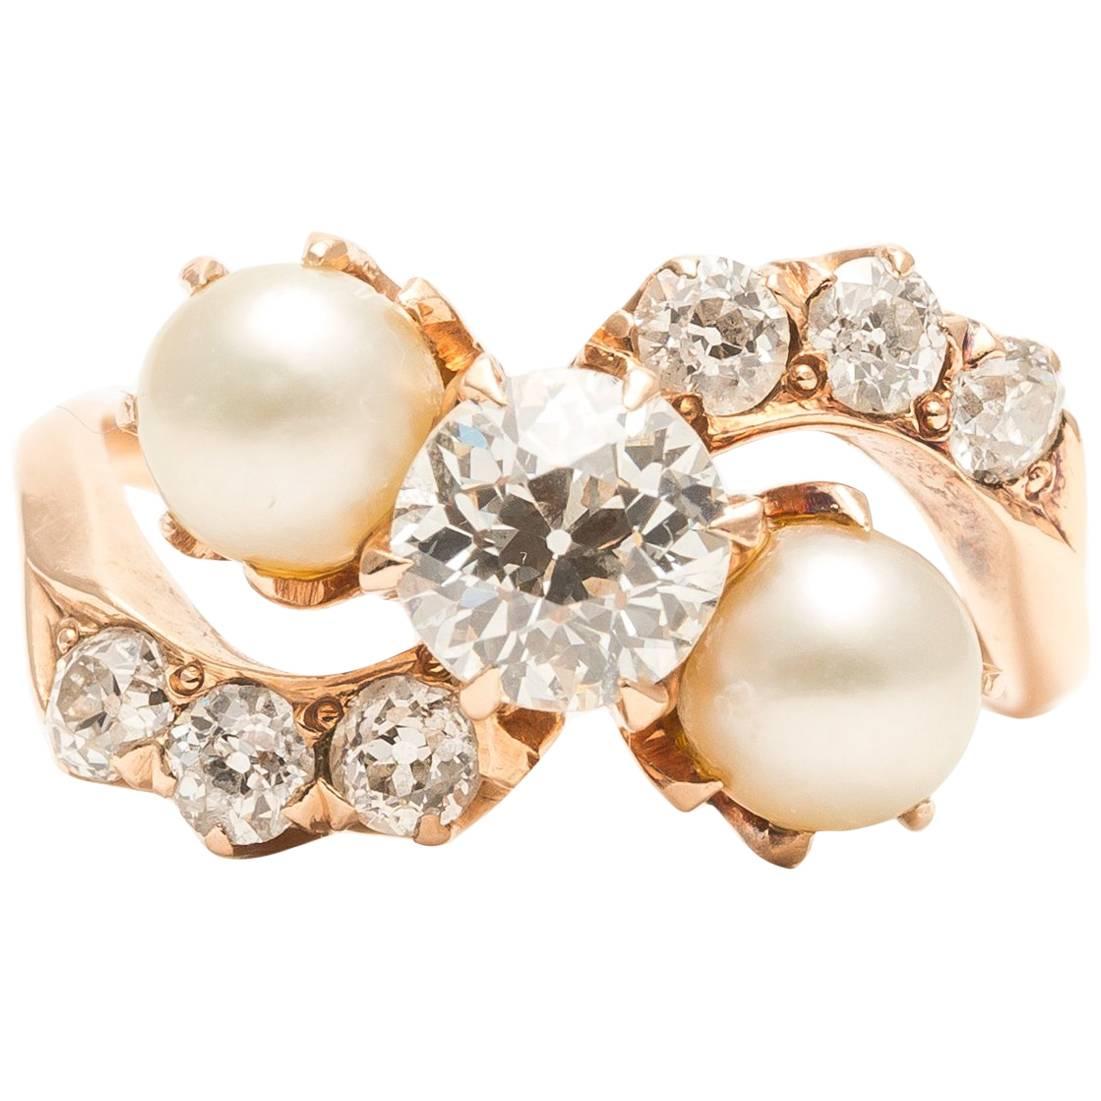 Entrancing Edwardian 1.20 Carat Diamond and Pearl Ring in Yellow Gold